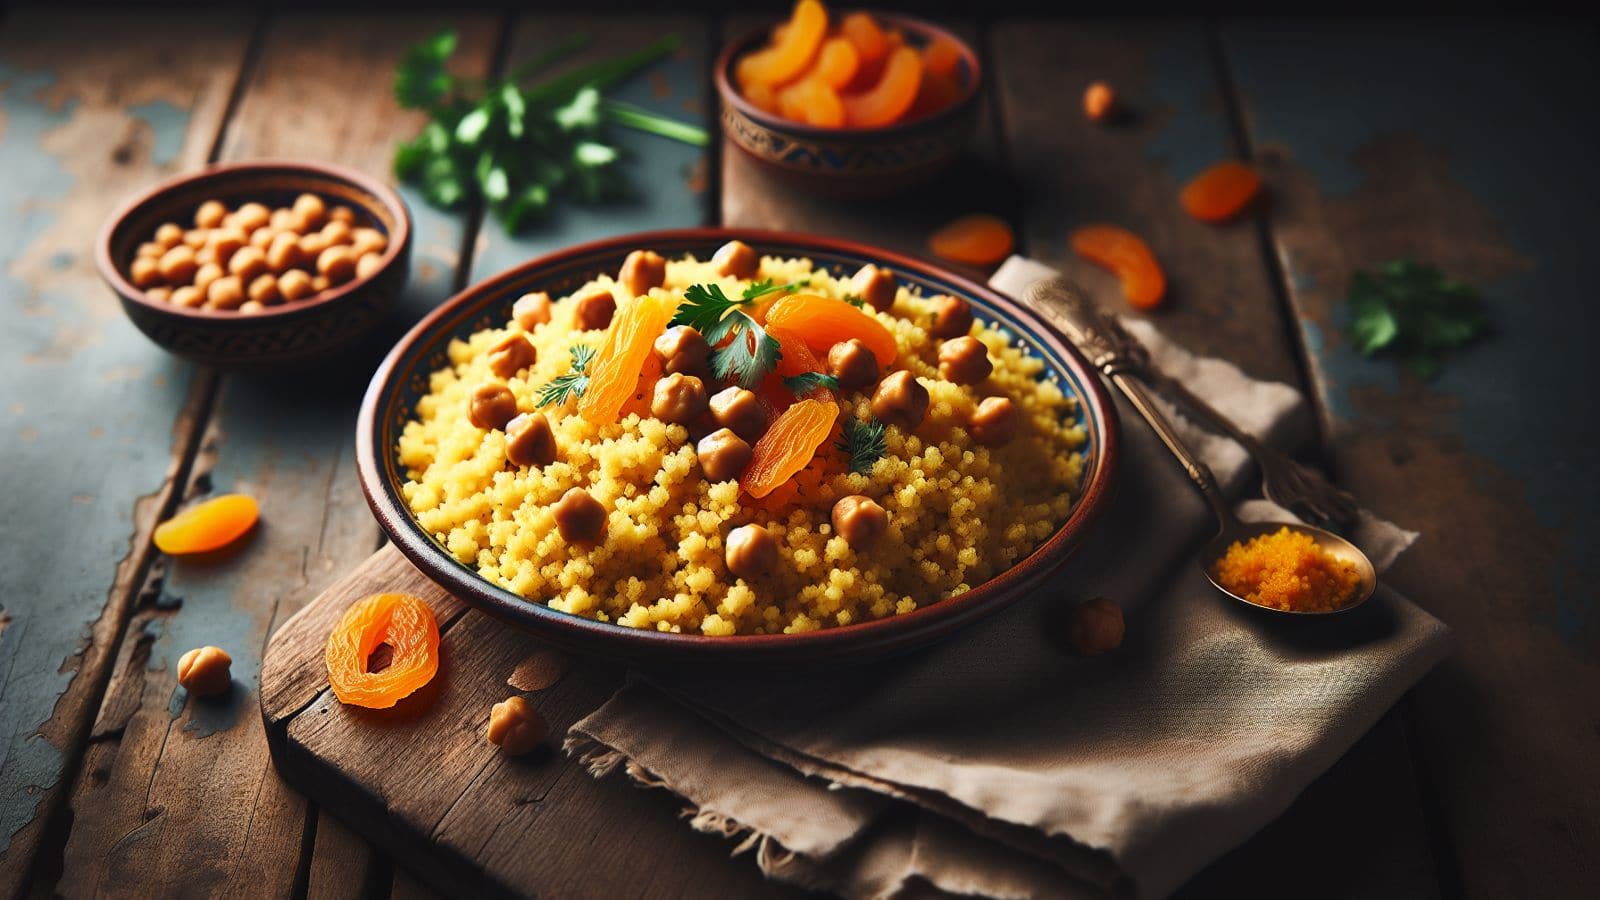 Try this Moroccan couscous pilaf recipe for a flavorsome day